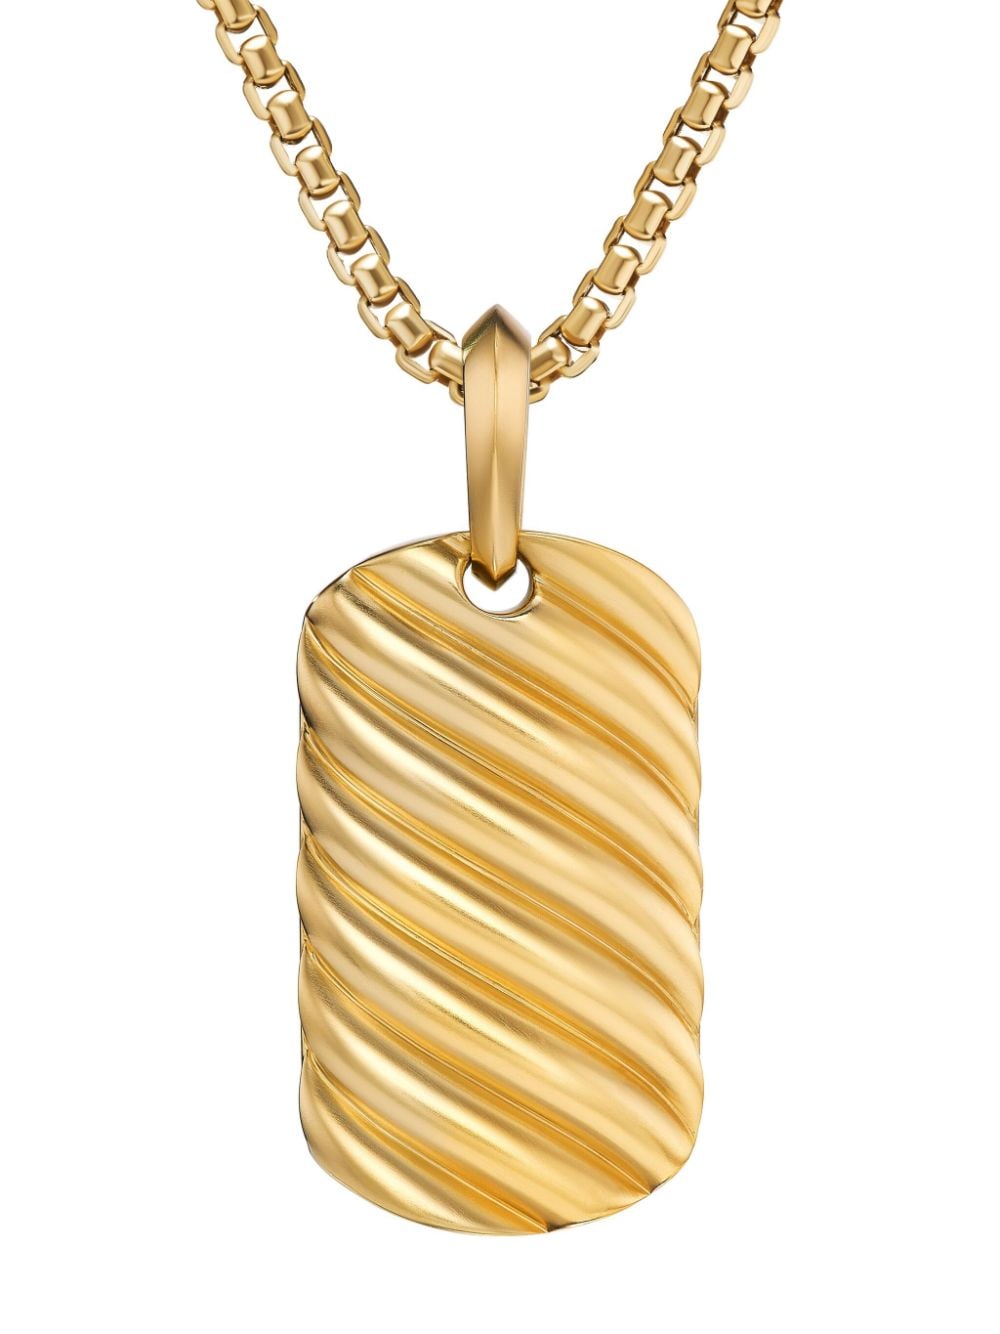 David Yurman 18kt Yellow Gold Sculpted Cable Tag Necklace Charm